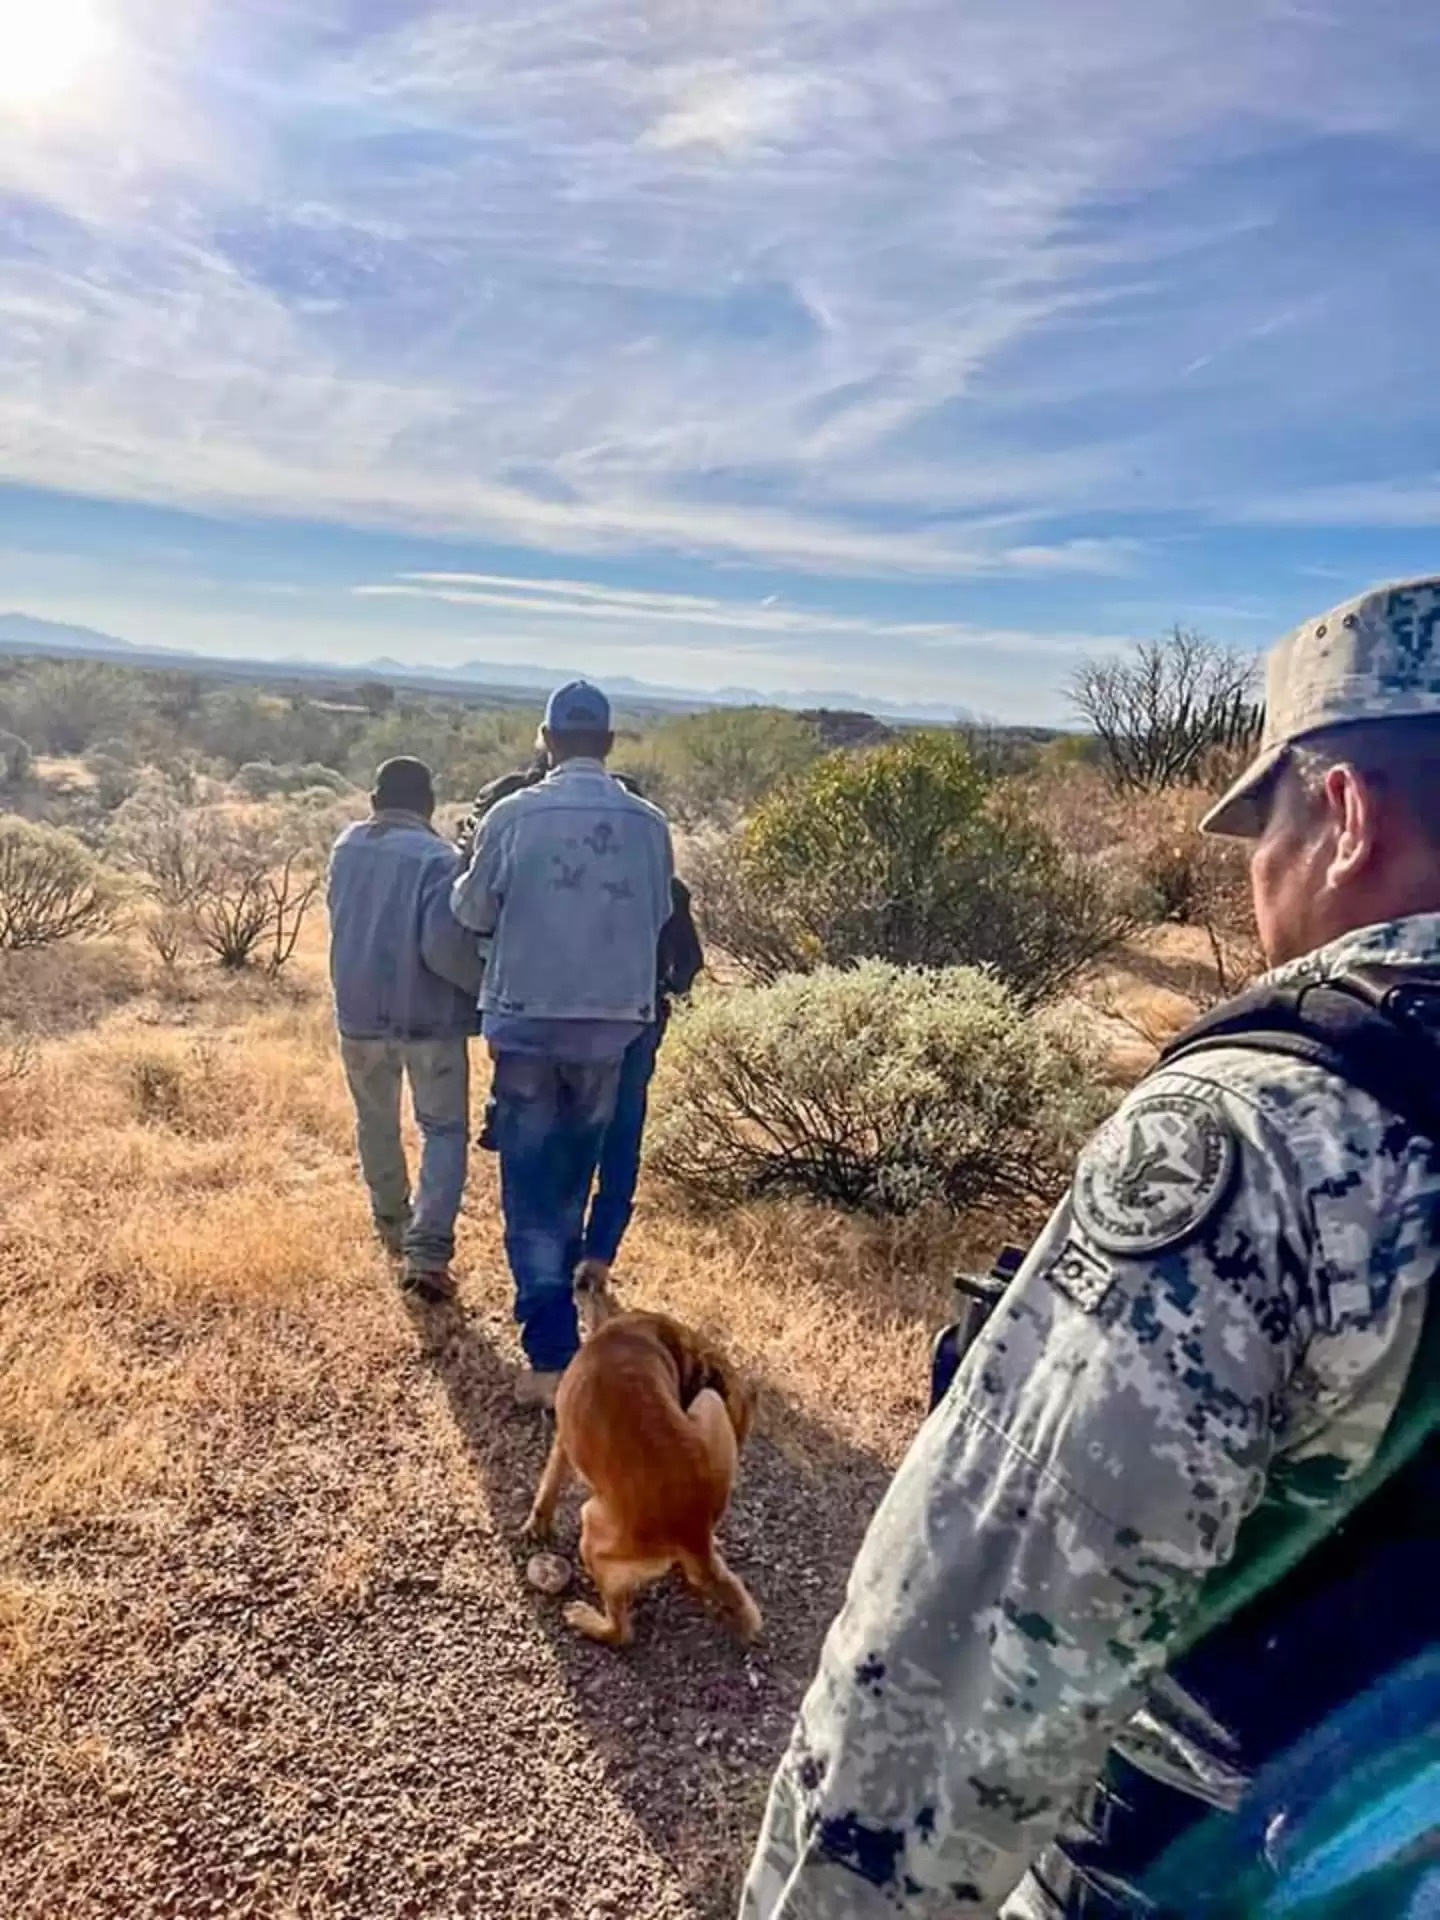 84-Year-Old Lost in the Desert Saved by His Dog's Unconditional Love